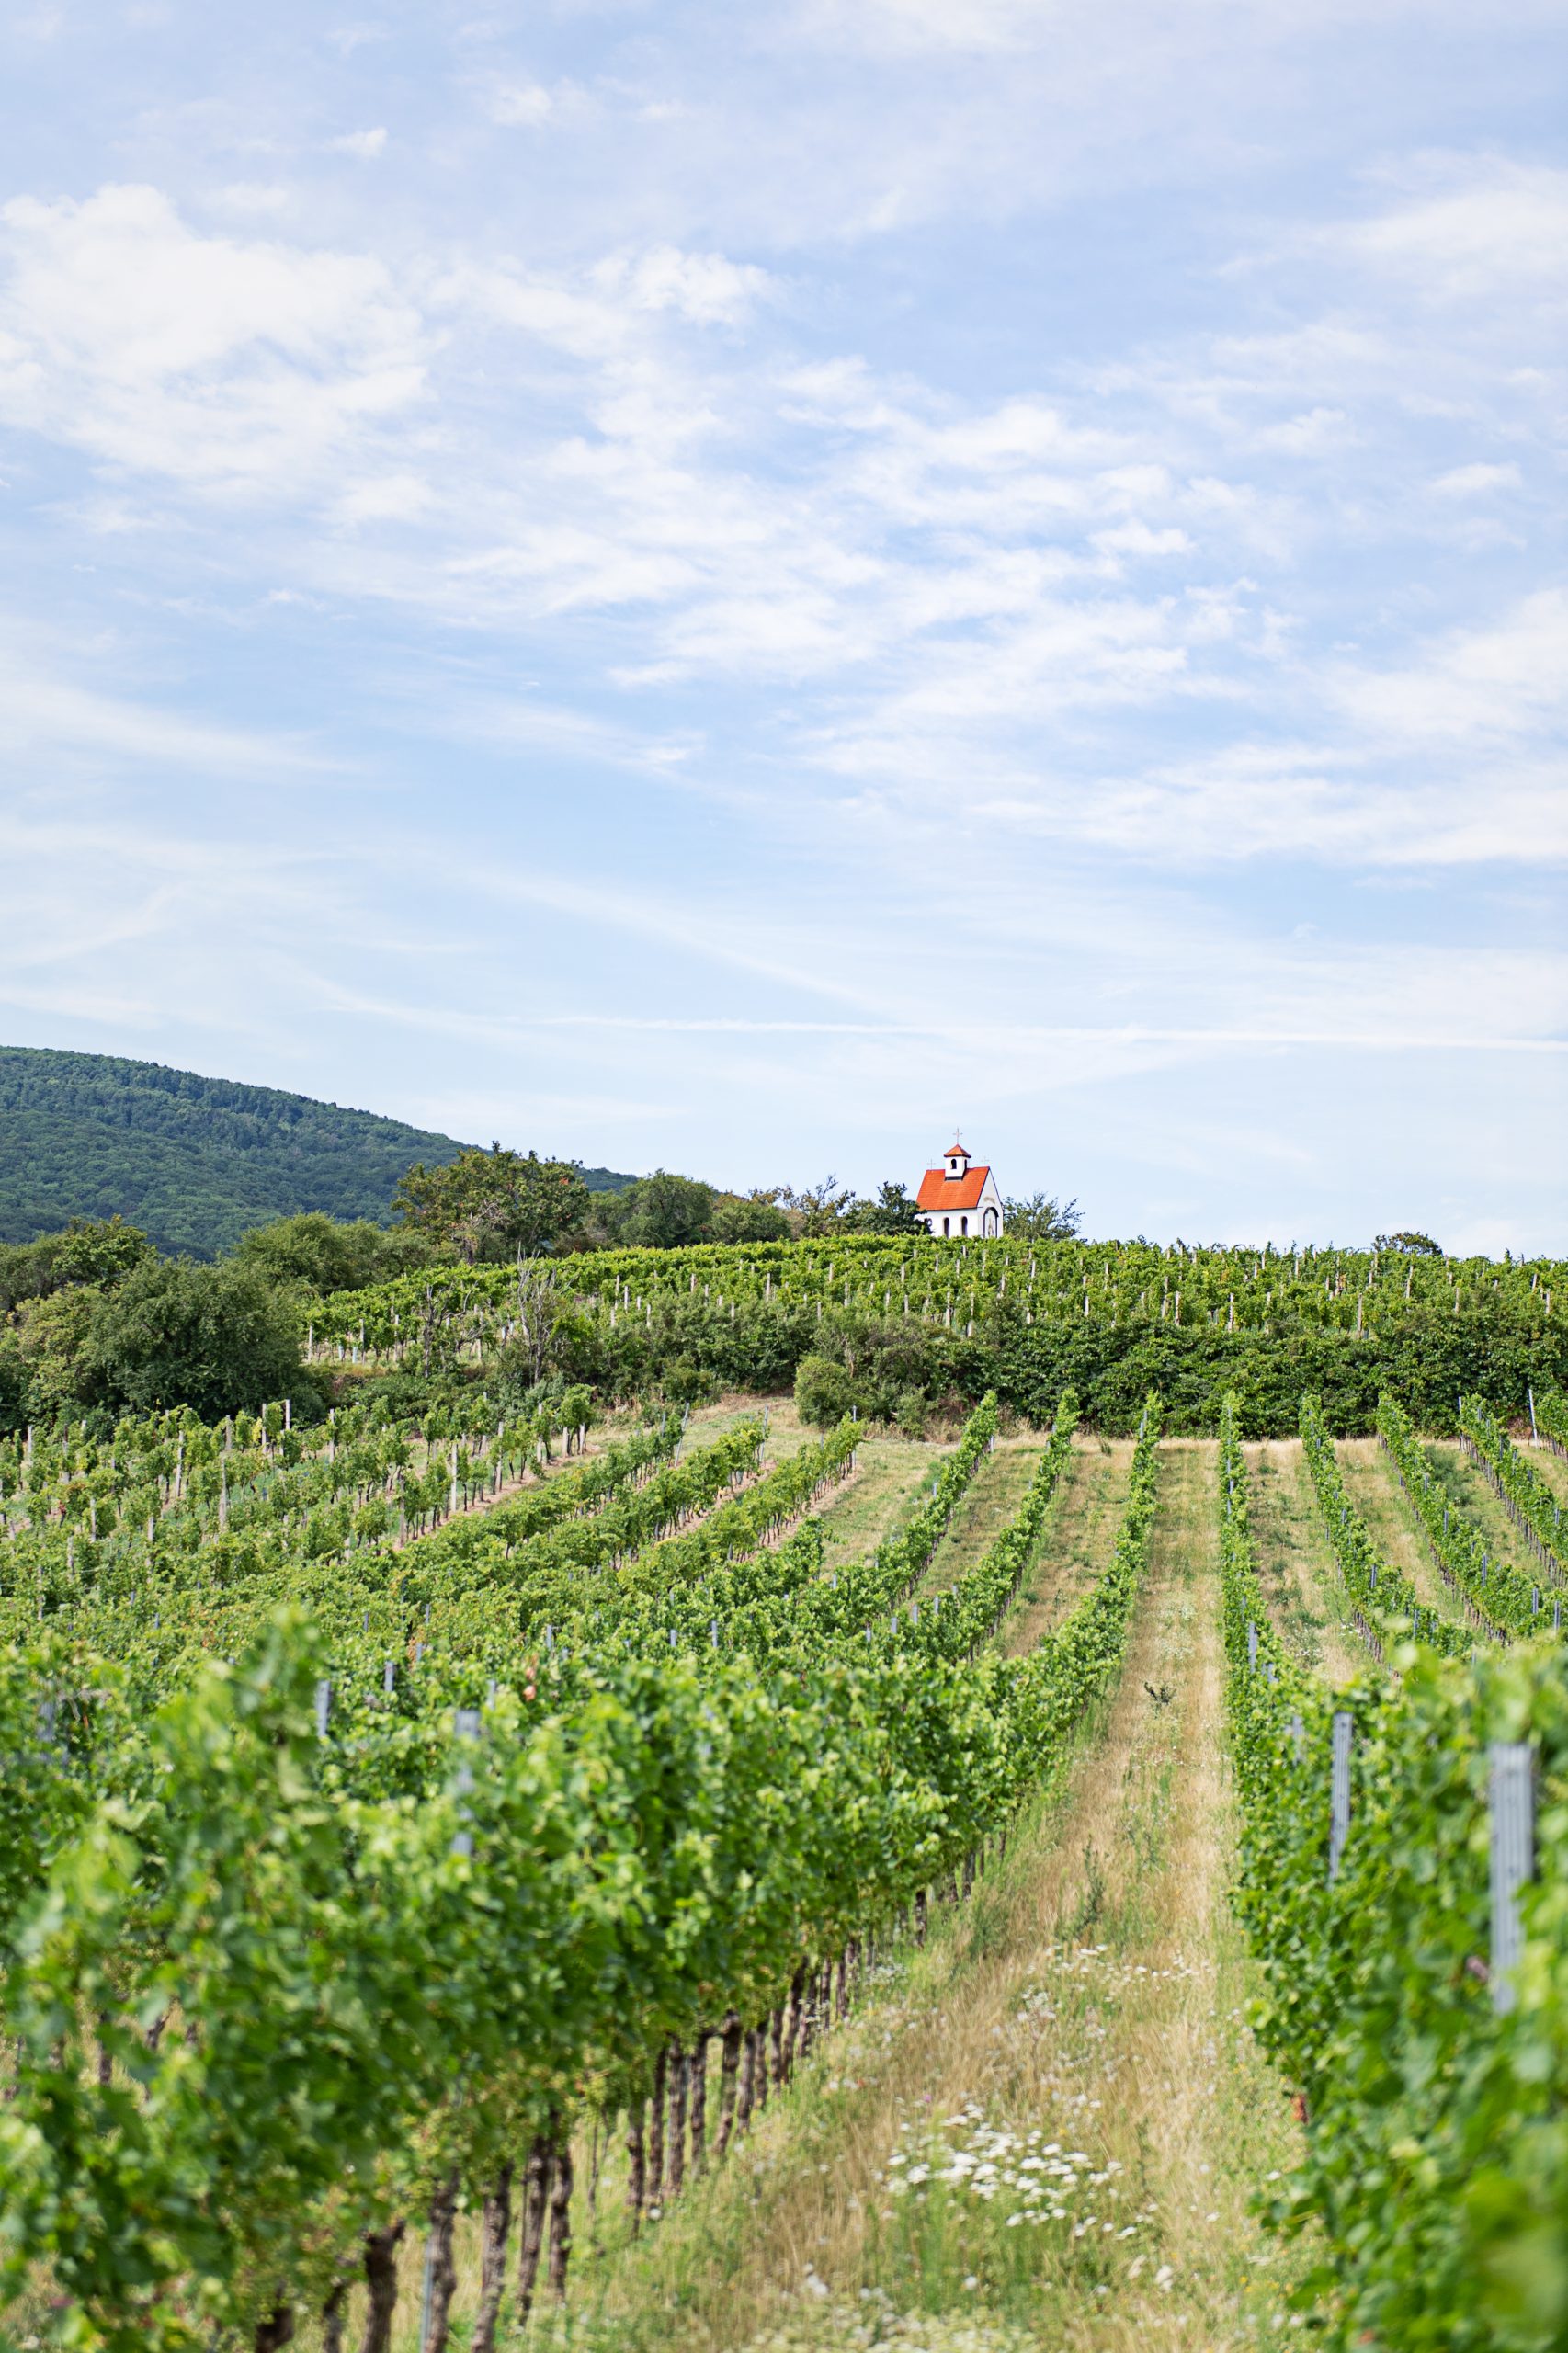 High temperatures and heavy rainfall mean fruity harvest for Austrian wines